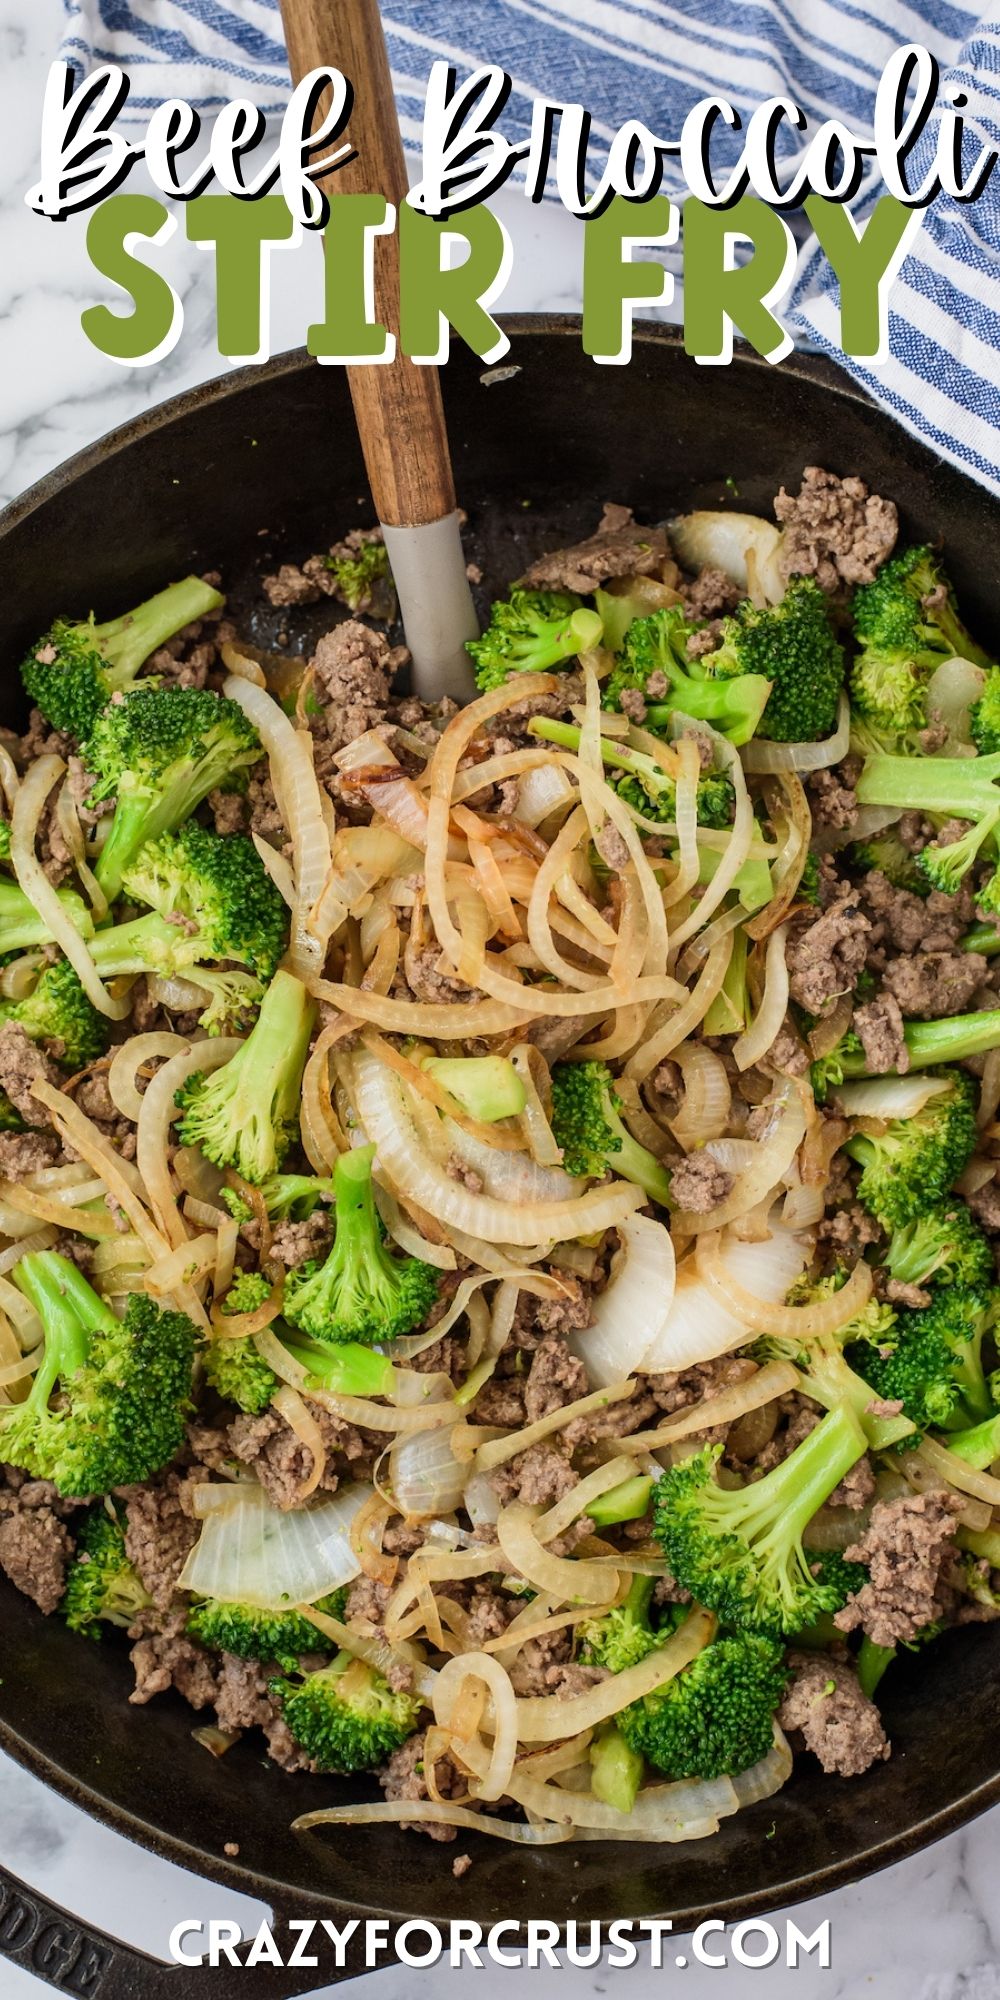 beef, broccoli and other things mixed together in a black pan with words on top